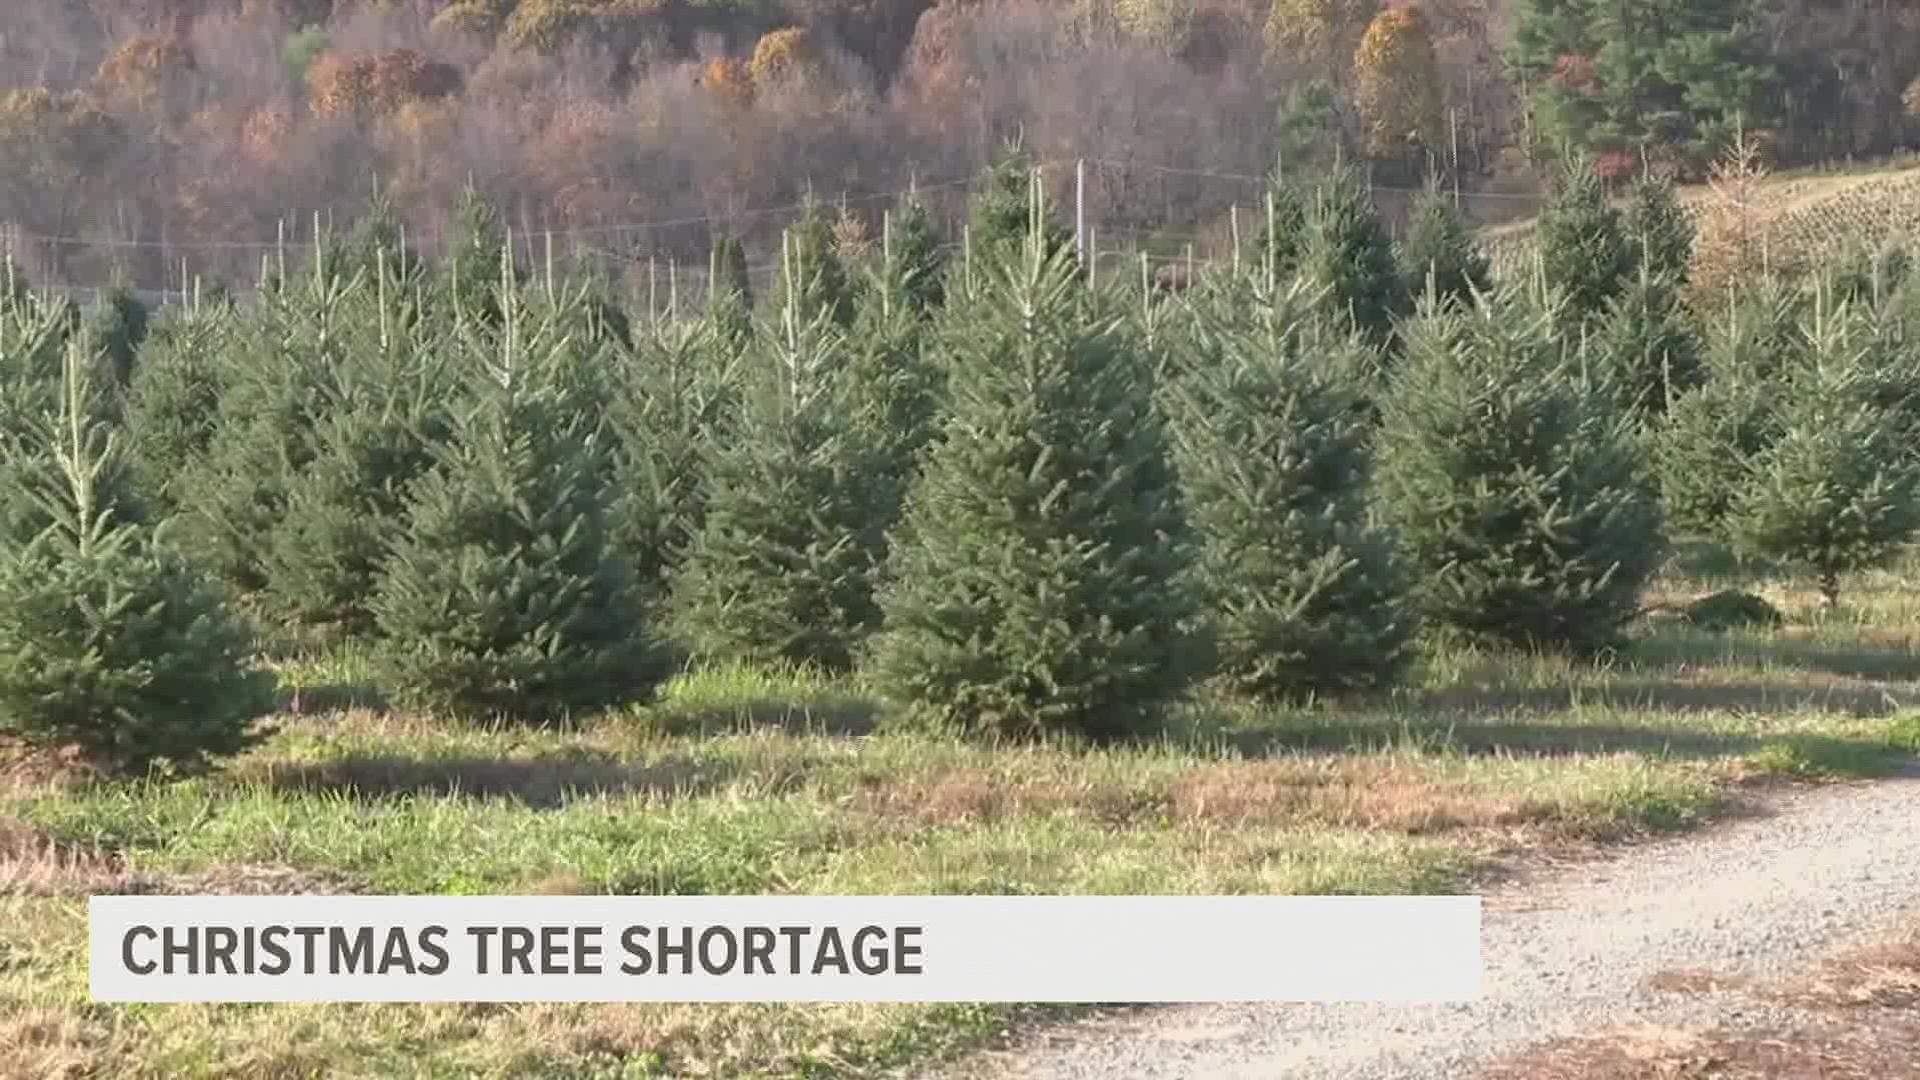 Last year, they saw a spike of people interested in having real Christmas trees in their homes.